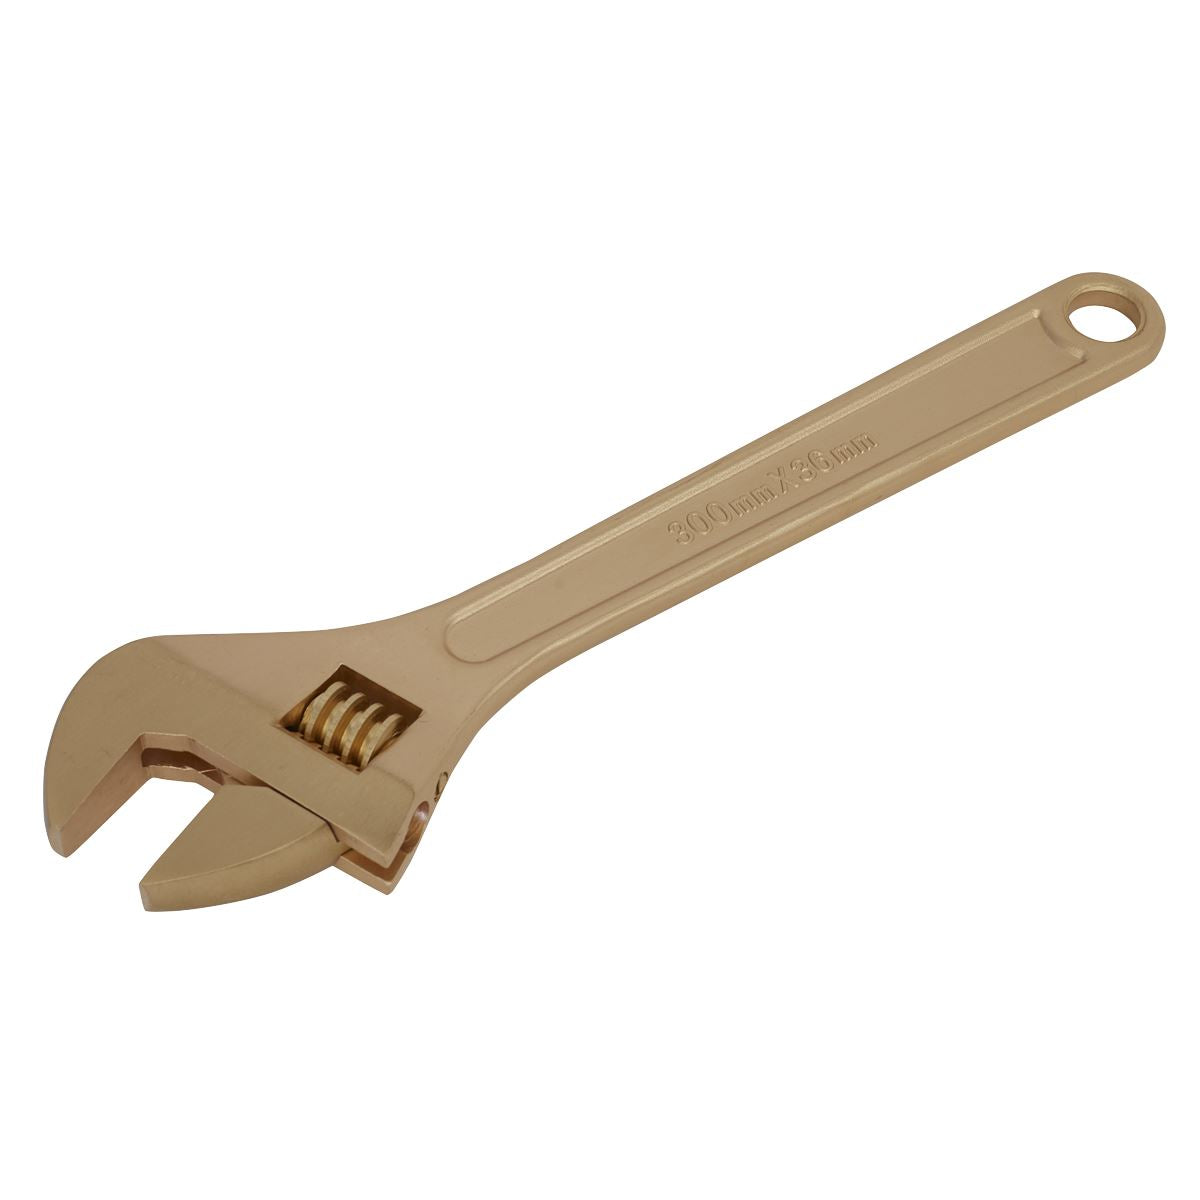 Sealey Adjustable Wrench 300mm - Non-Sparking NS068